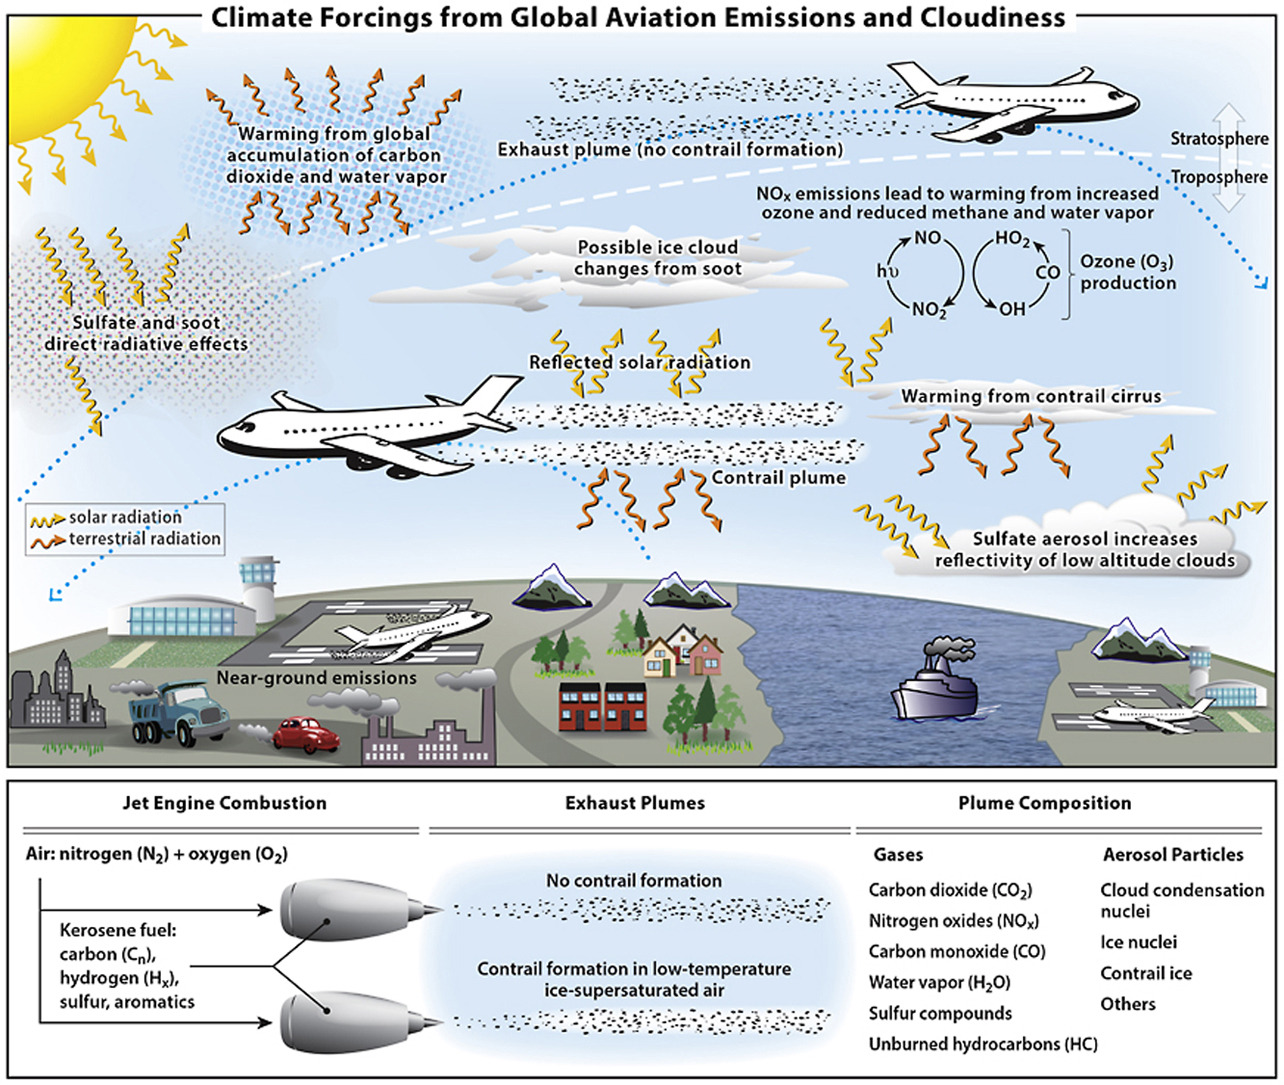 Schematic overview of the processes by which aviation emissions and increased cirrus cloudiness affect the climate system. Net positive RF (warming) contributions arise from CO2, water vapor, NOx, and soot emissions and from contrail cirrus (consisting of linear contrails and the cirrus cloudiness arising from them). Negative RF (cooling) contributions arise from sulfate aerosol production. Net warming from NOx emissions is a sum over warming (short-term ozone increase) and cooling (decreases in methane and stratospheric water vapor, and a long-term decrease in ozone) terms. Net warming from contrail cirrus is a sum over the day/night cycle. These contributions involve a large number of chemical, microphysical, transport and radiative processes in the global atmosphere. Source: Lee et al (2020)